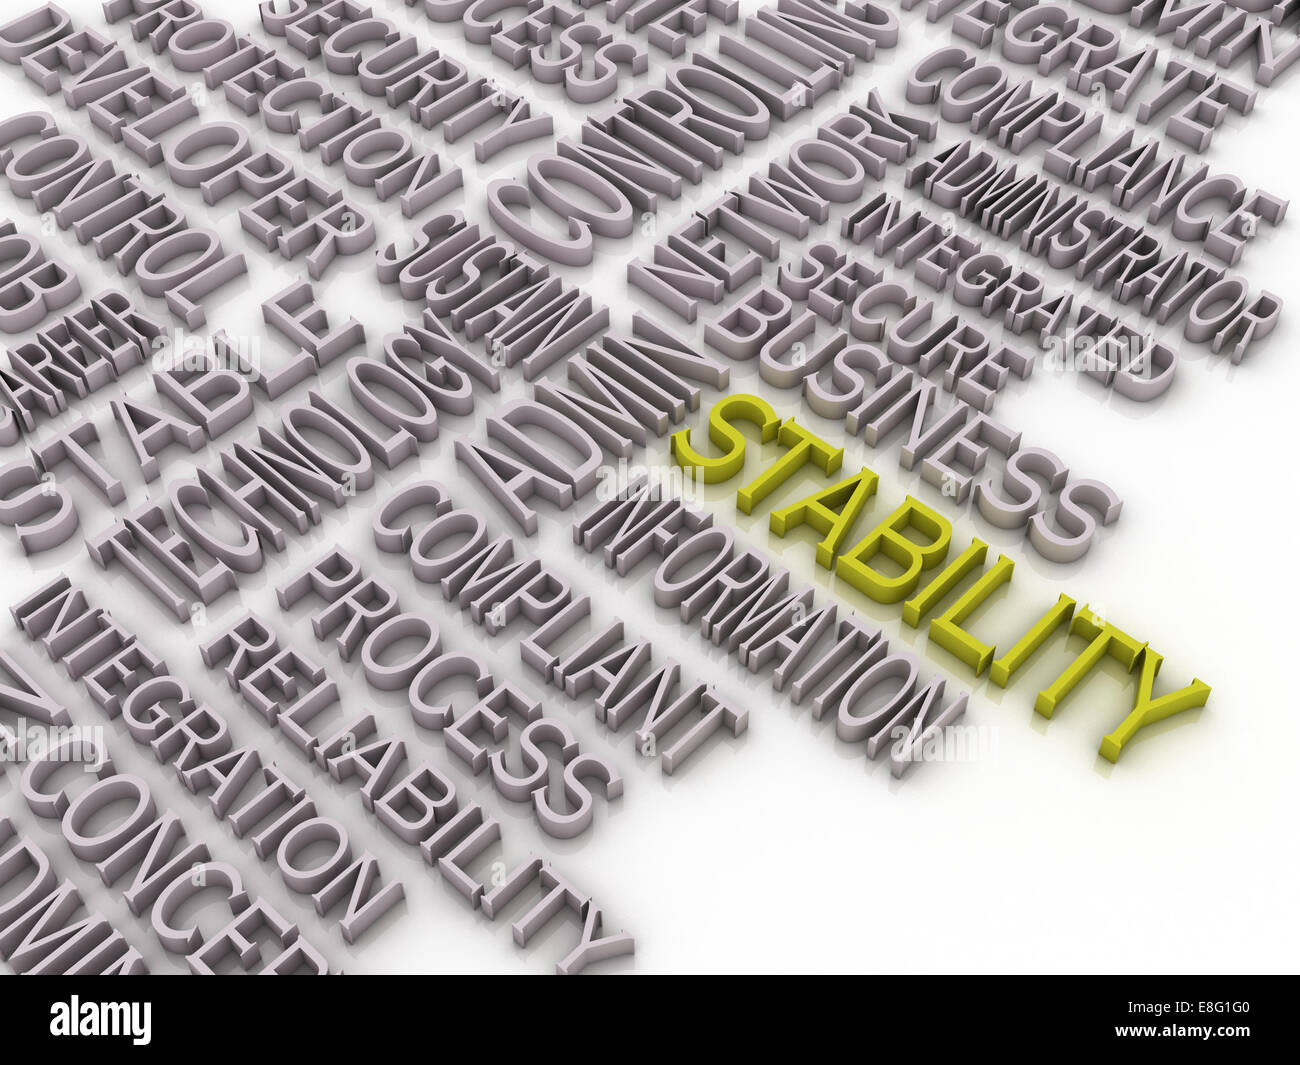 3d imagen Stability concept word cloud background. Stability Network Issues Stock Photo